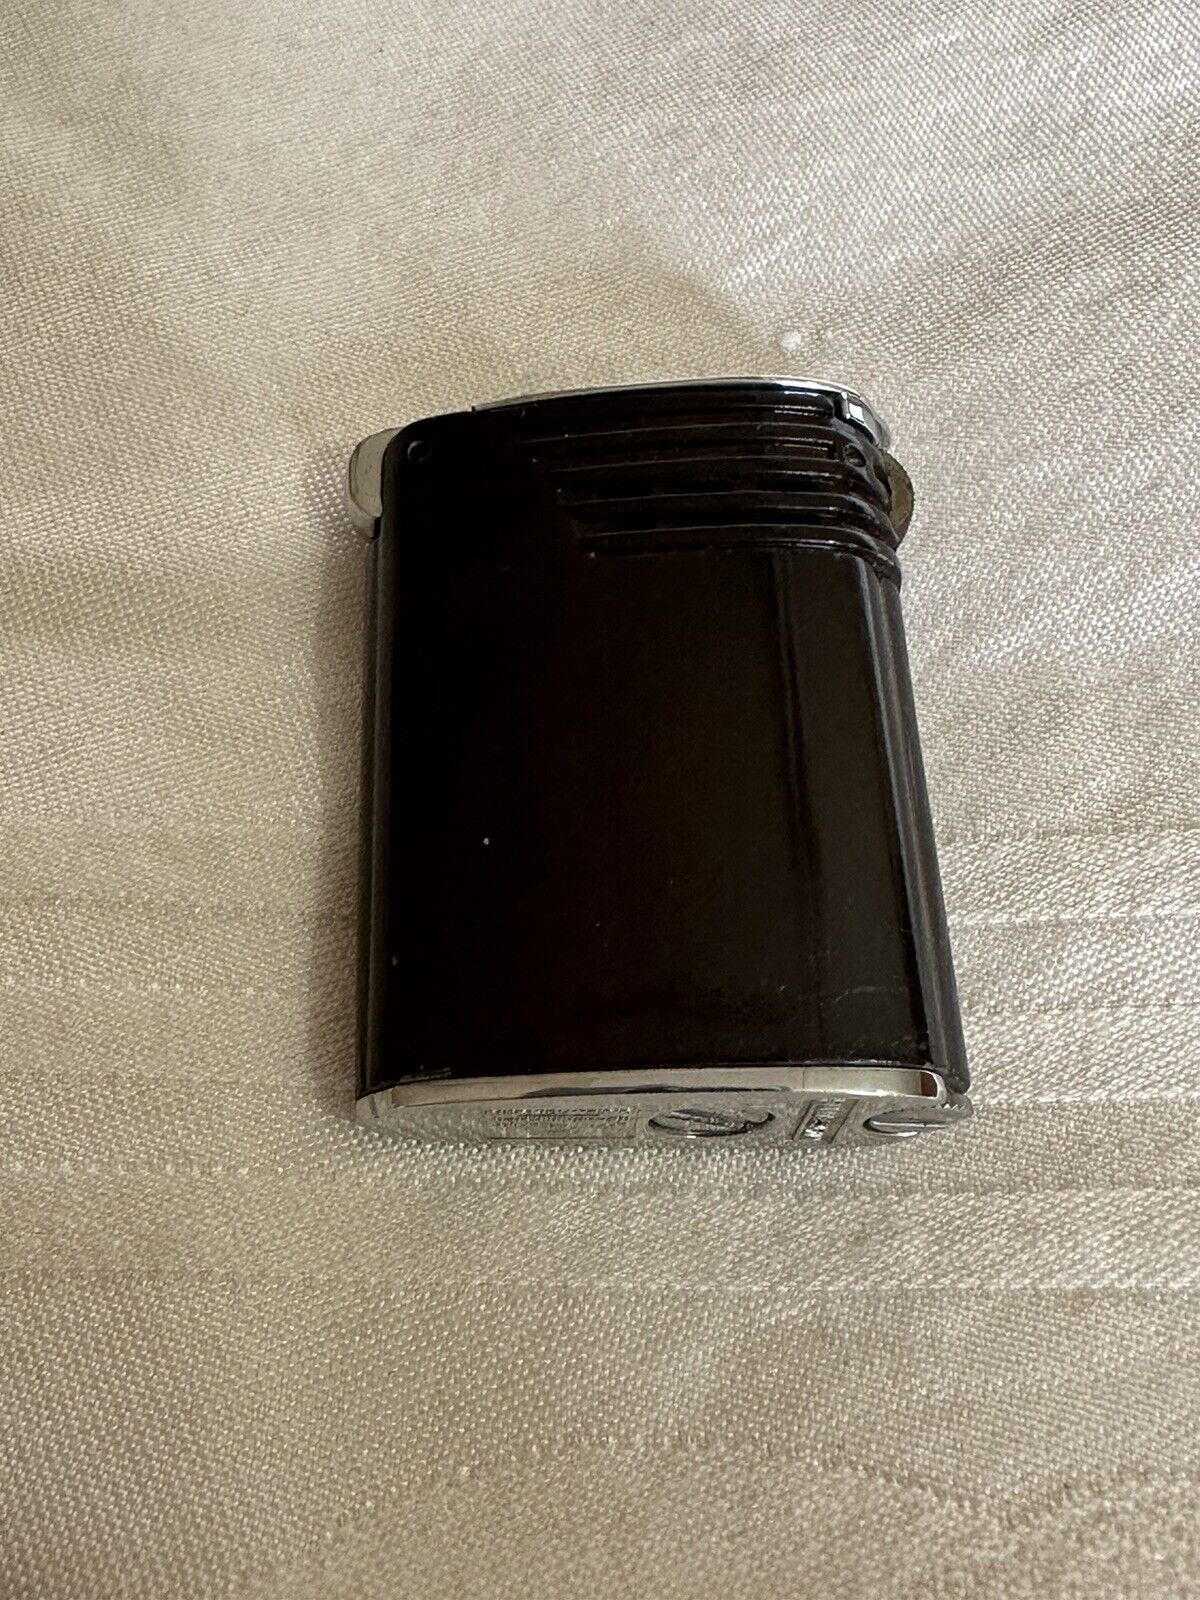 Vintage Ronson Rama Spin Lighter Working Condition